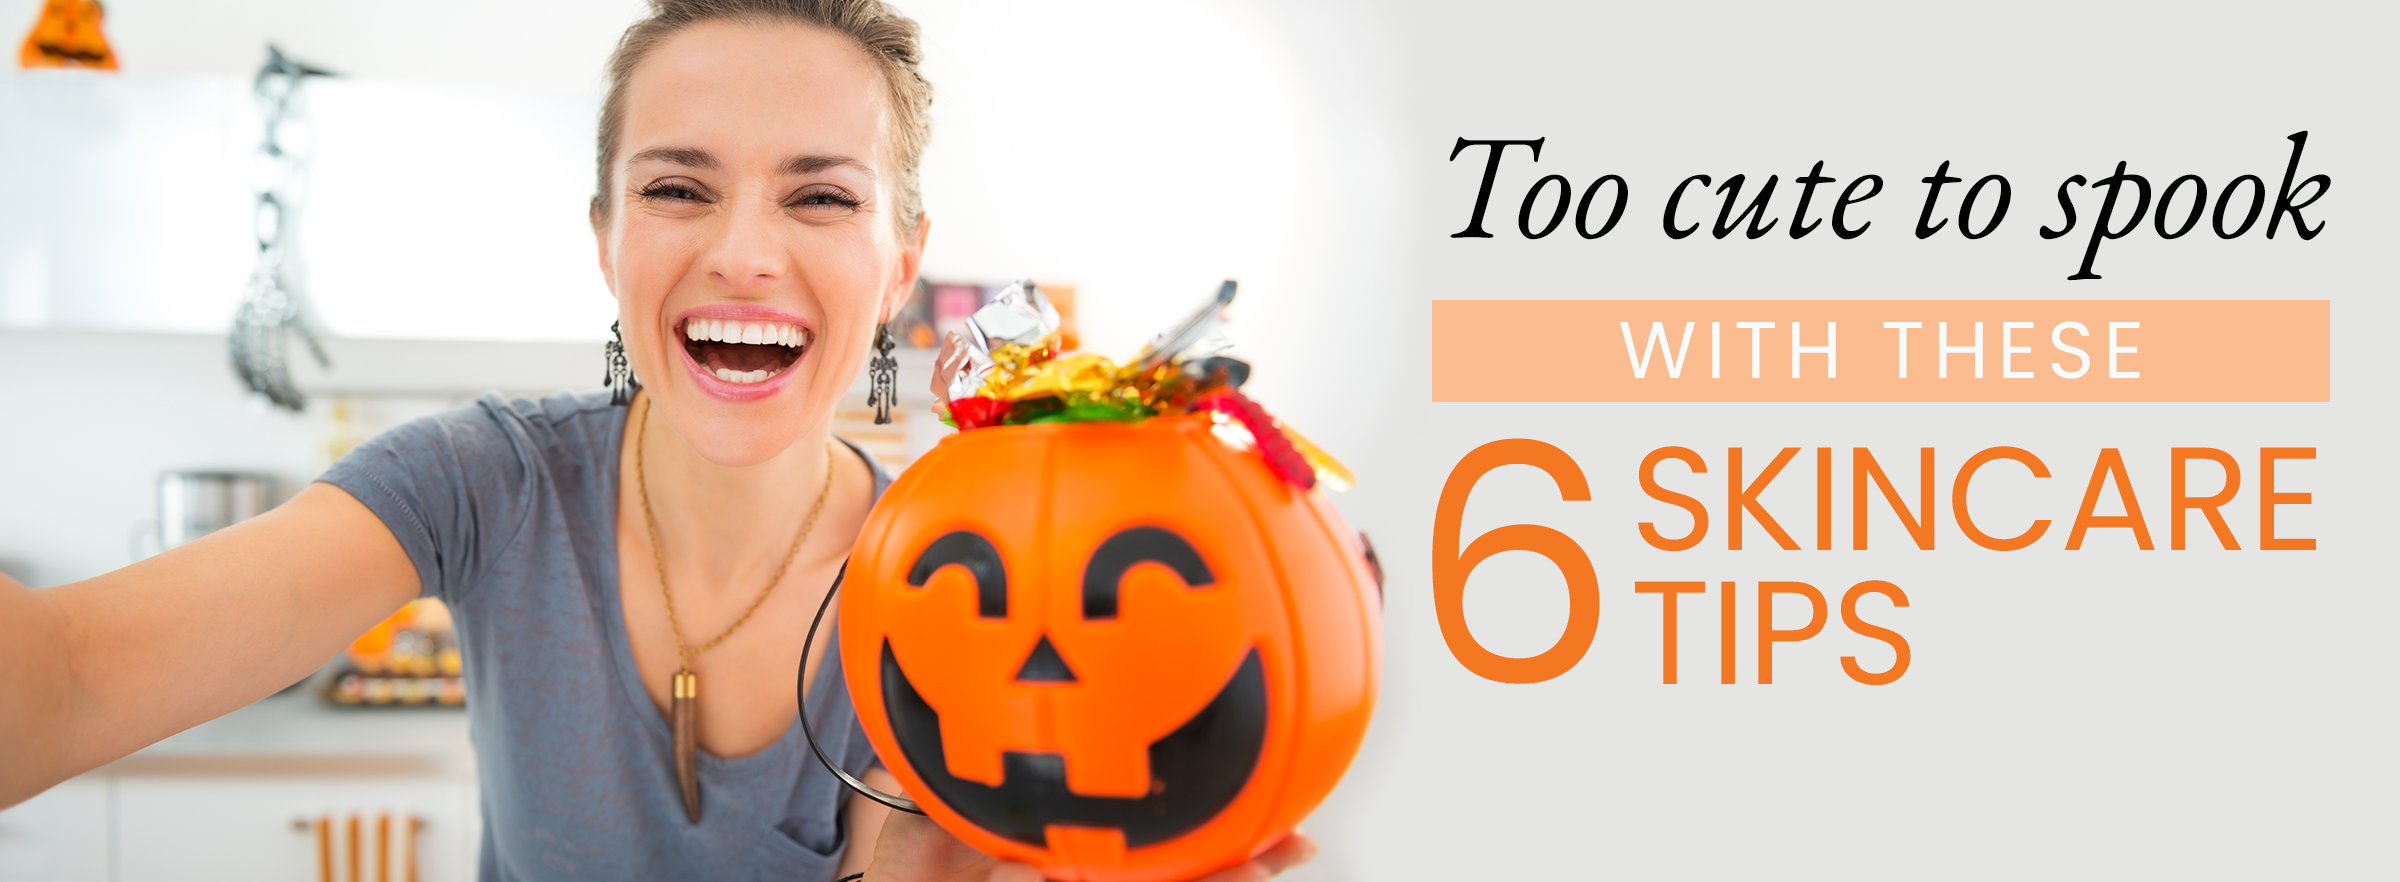 Too Cute to Spook with These 6 Skincare Tips